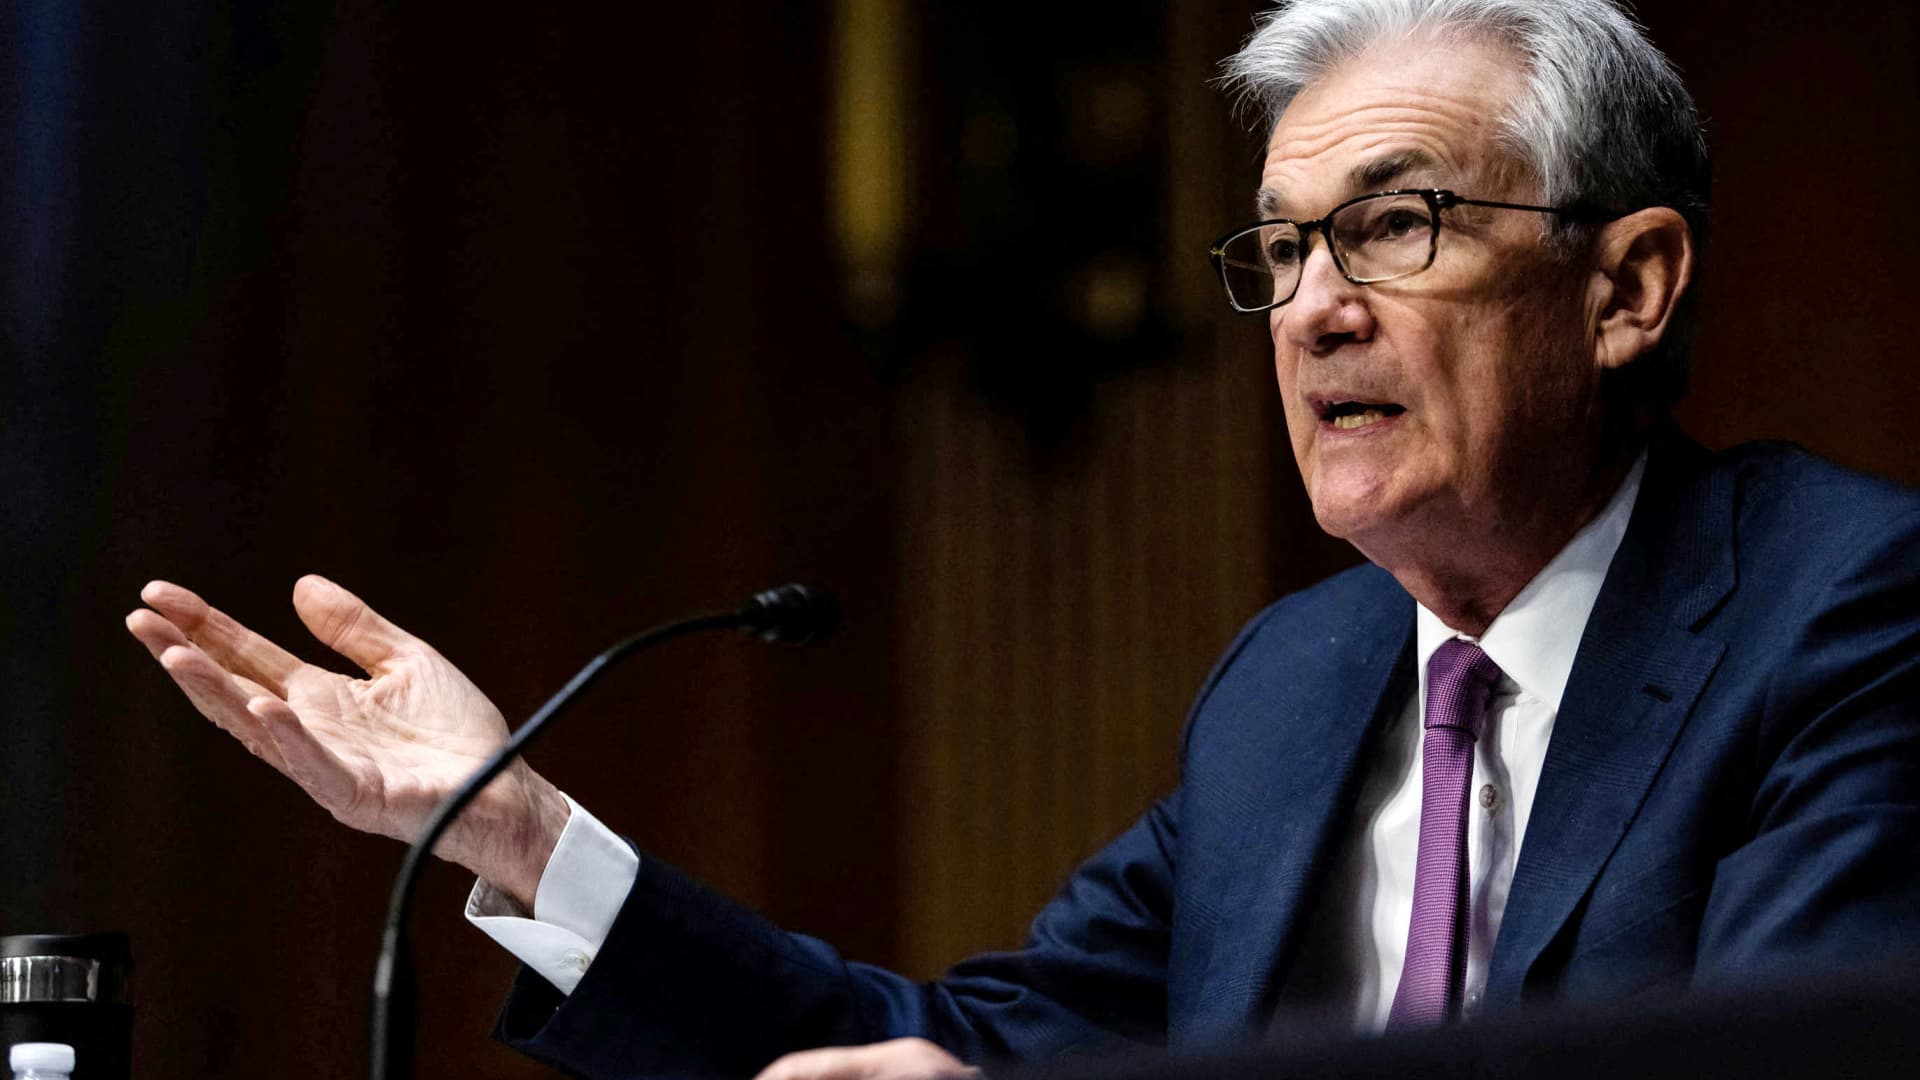 U.S. Federal Reserve Board Chairman Jerome Powell speaks during his re-nominations hearing of the Senate Banking, Housing and Urban Affairs Committee on Capitol Hill, in Washington, U.S., January 11, 2022.